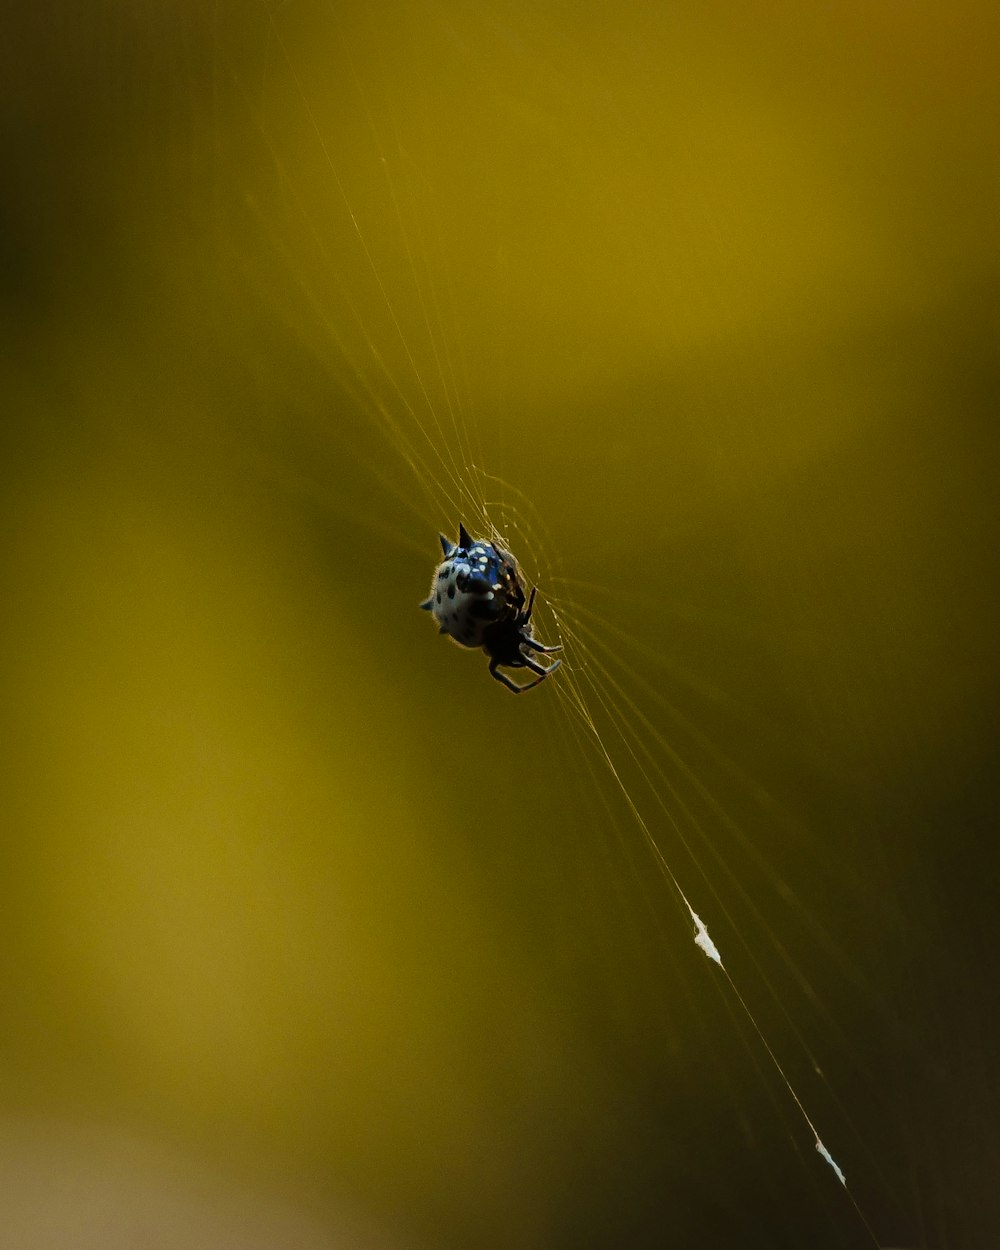 a close up of a spider on it's web